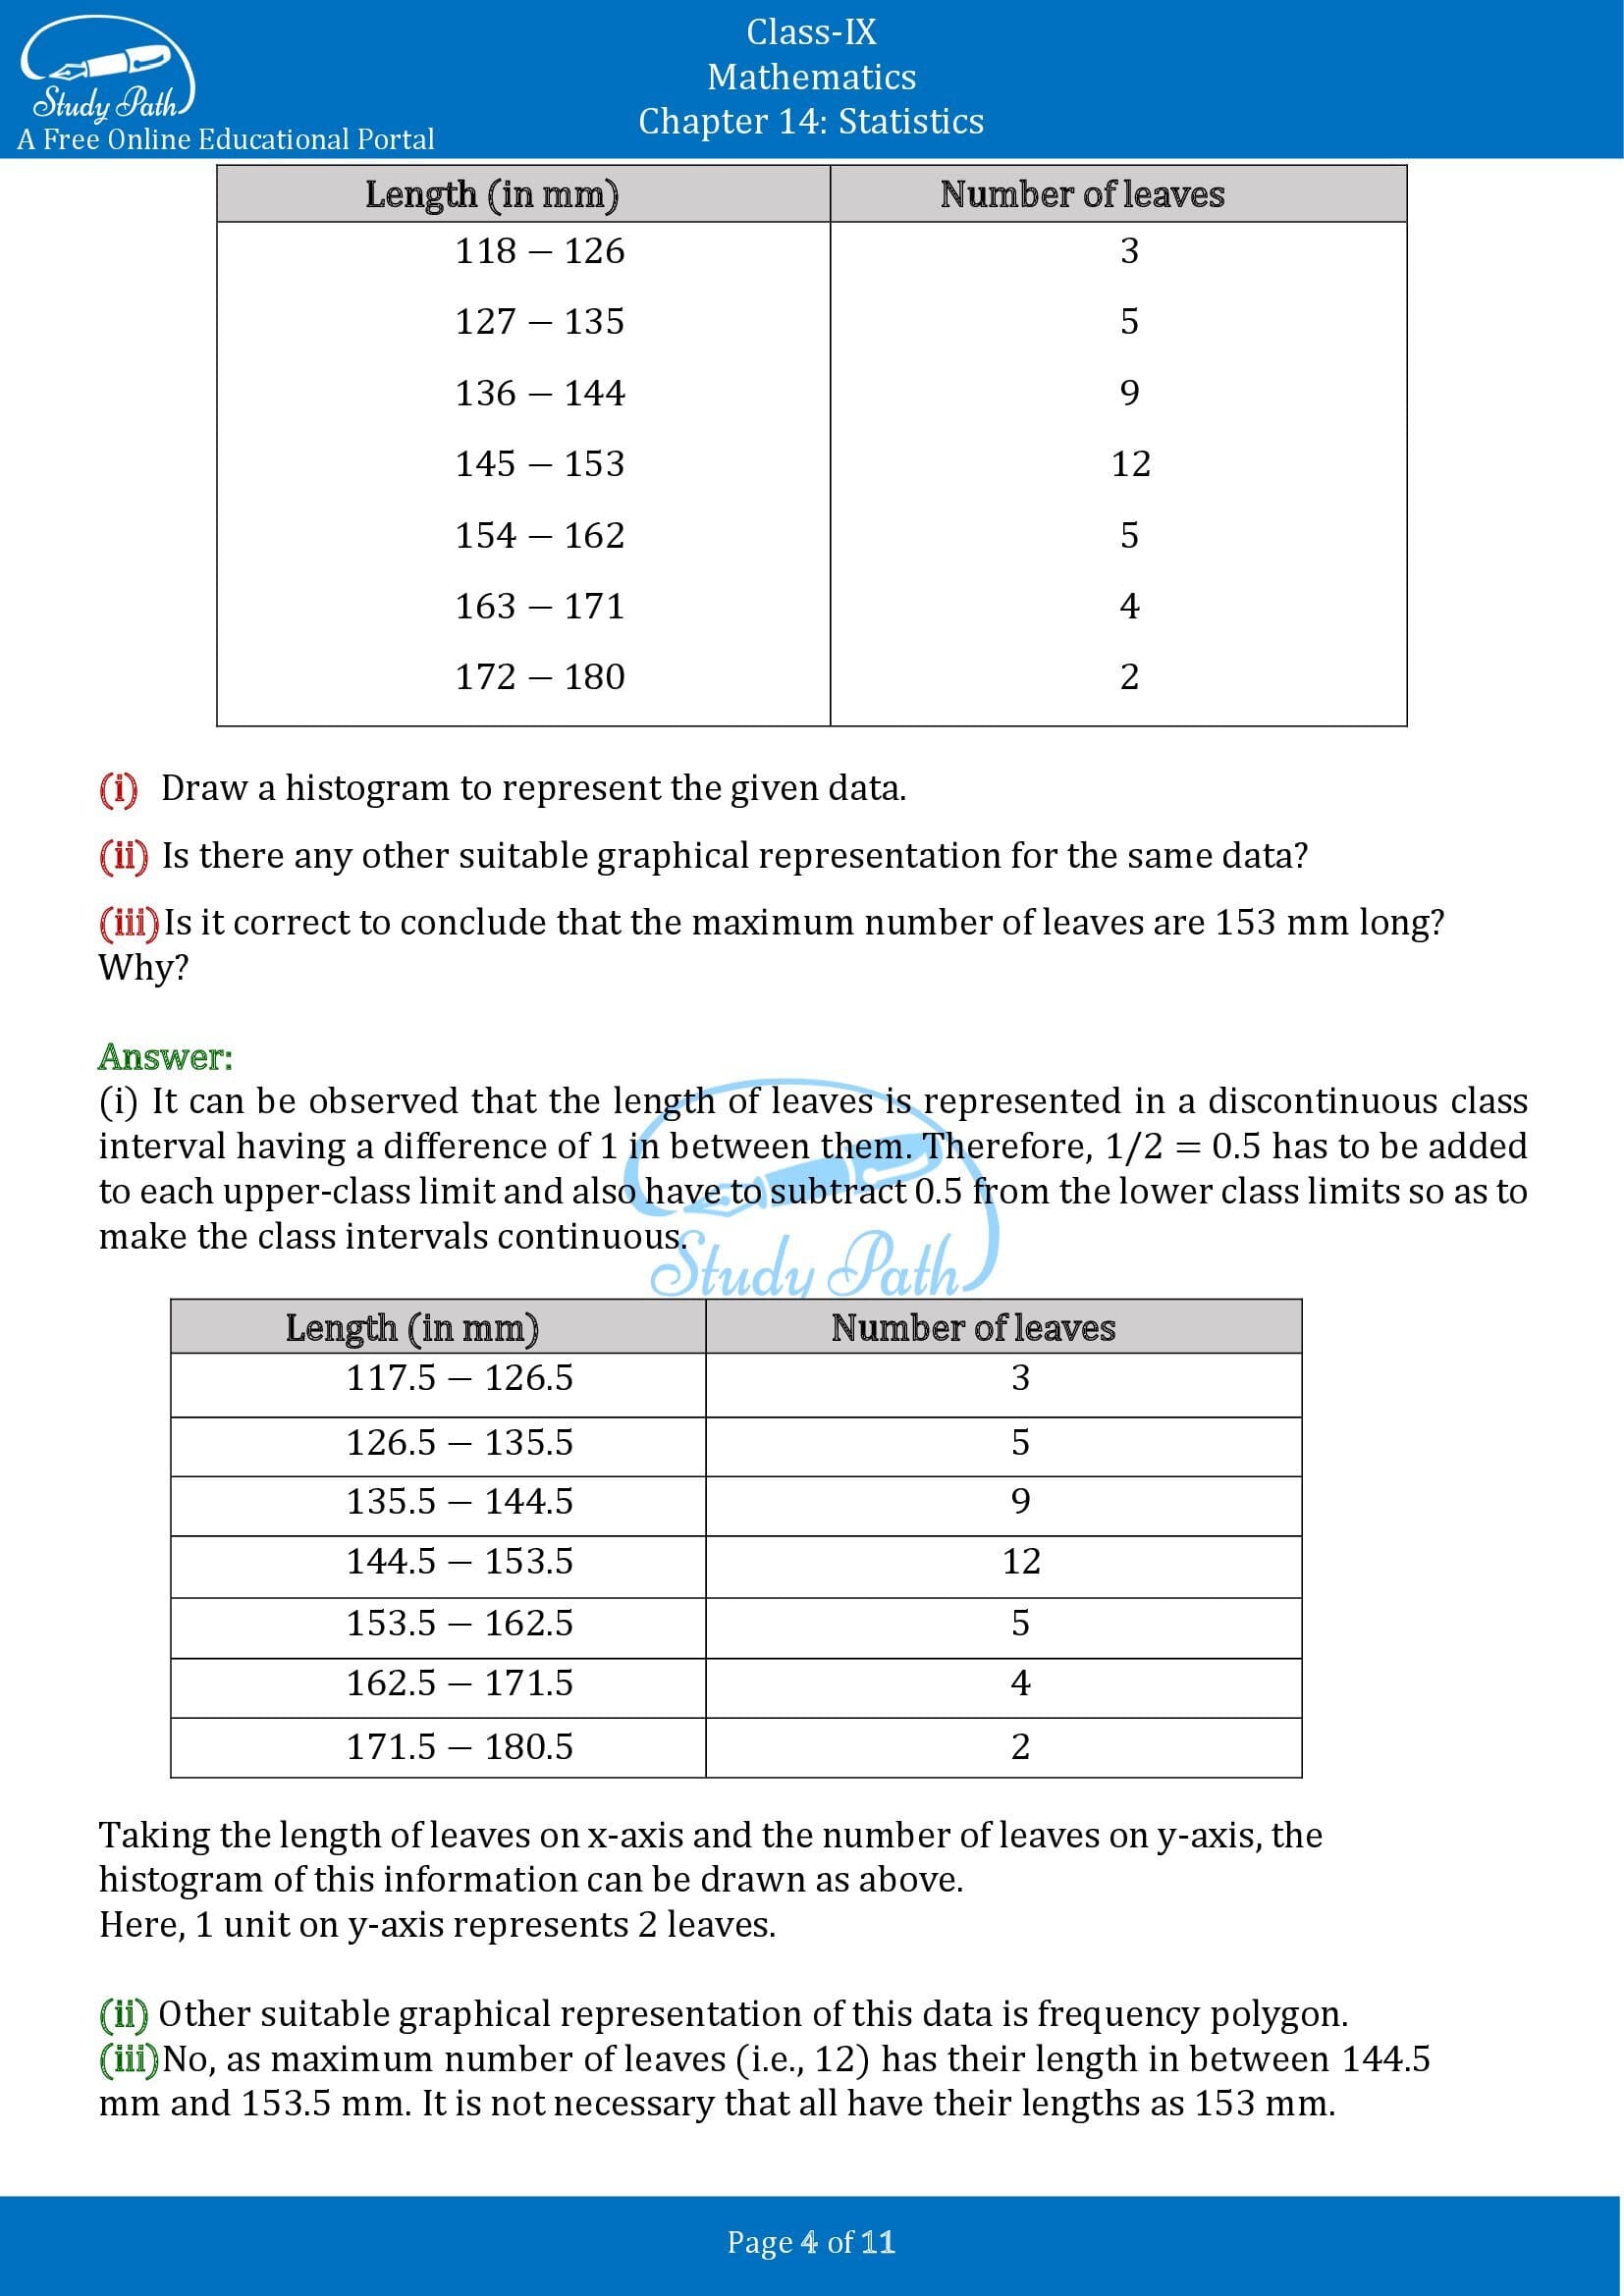 NCERT Solutions for Class 9 Maths Chapter 14 Statistics Exercise 14.3 00004